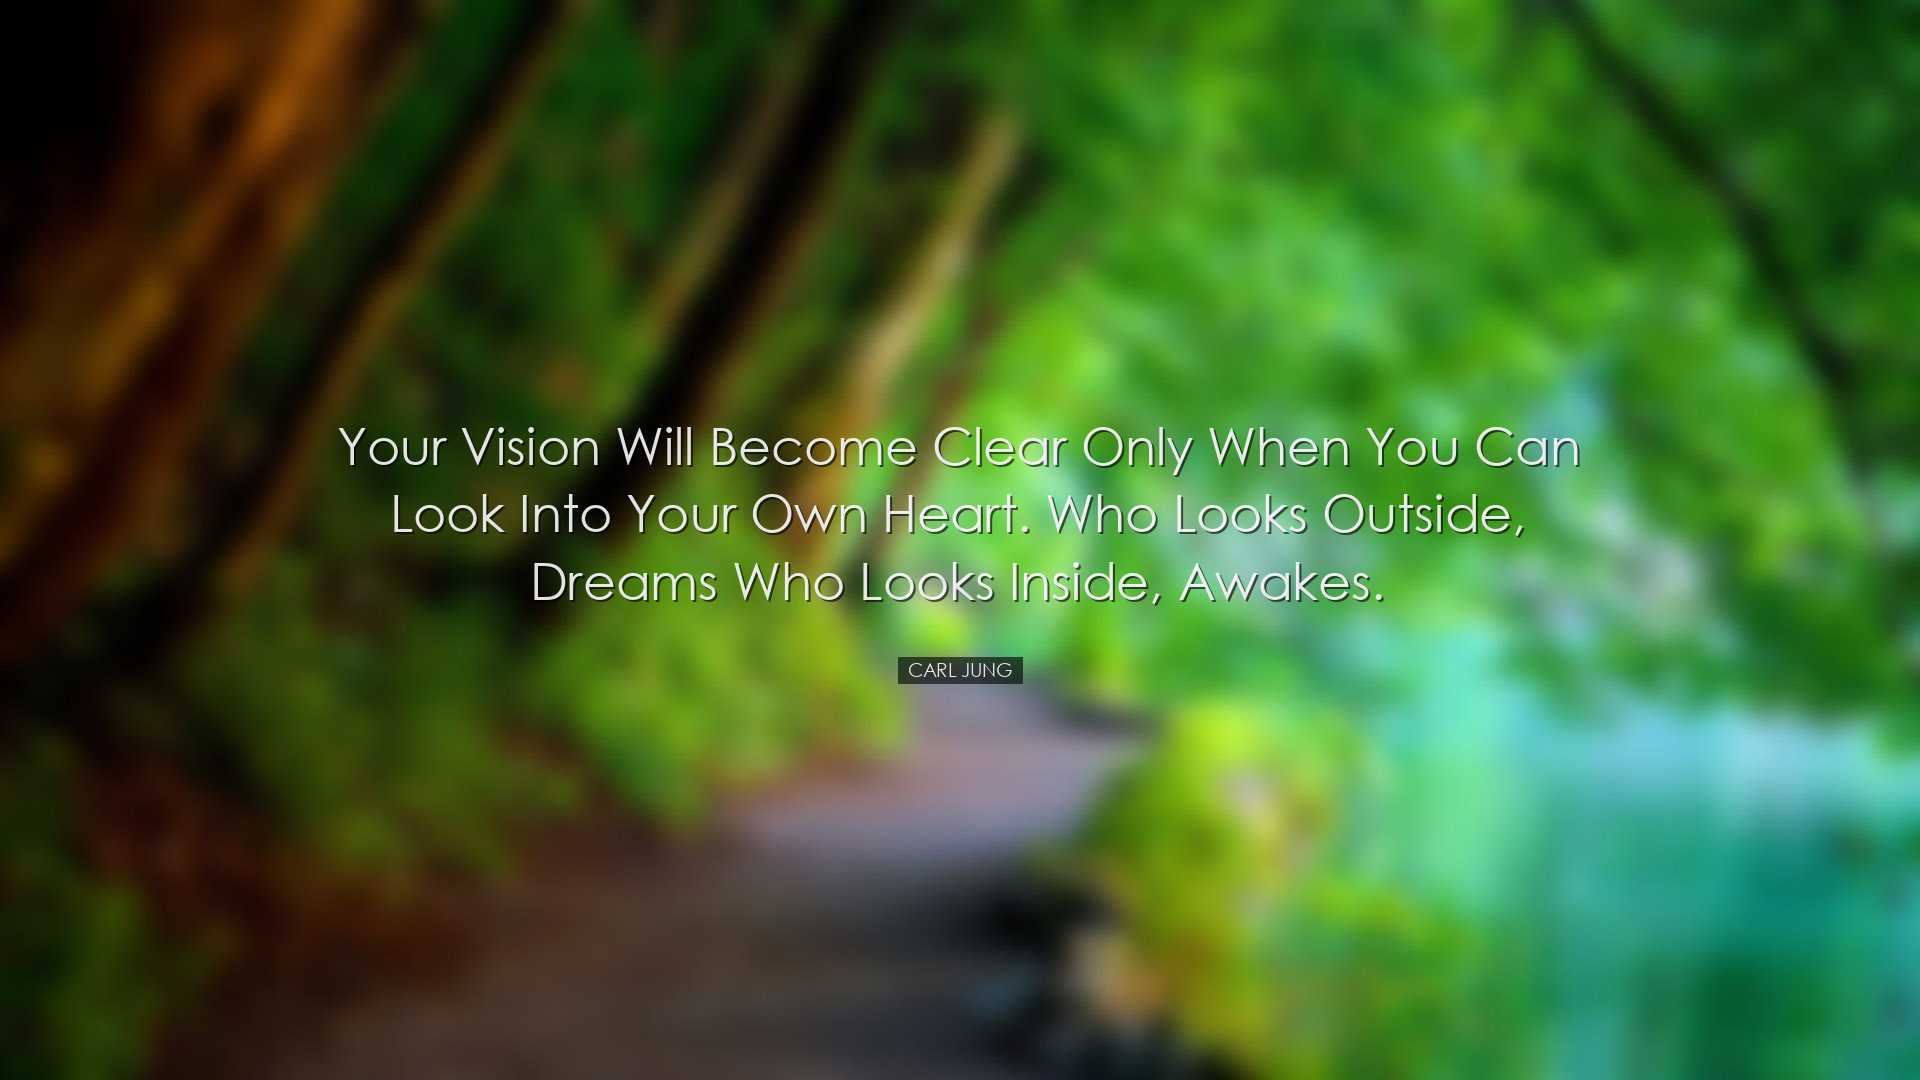 Your vision will become clear only when you can look into your own